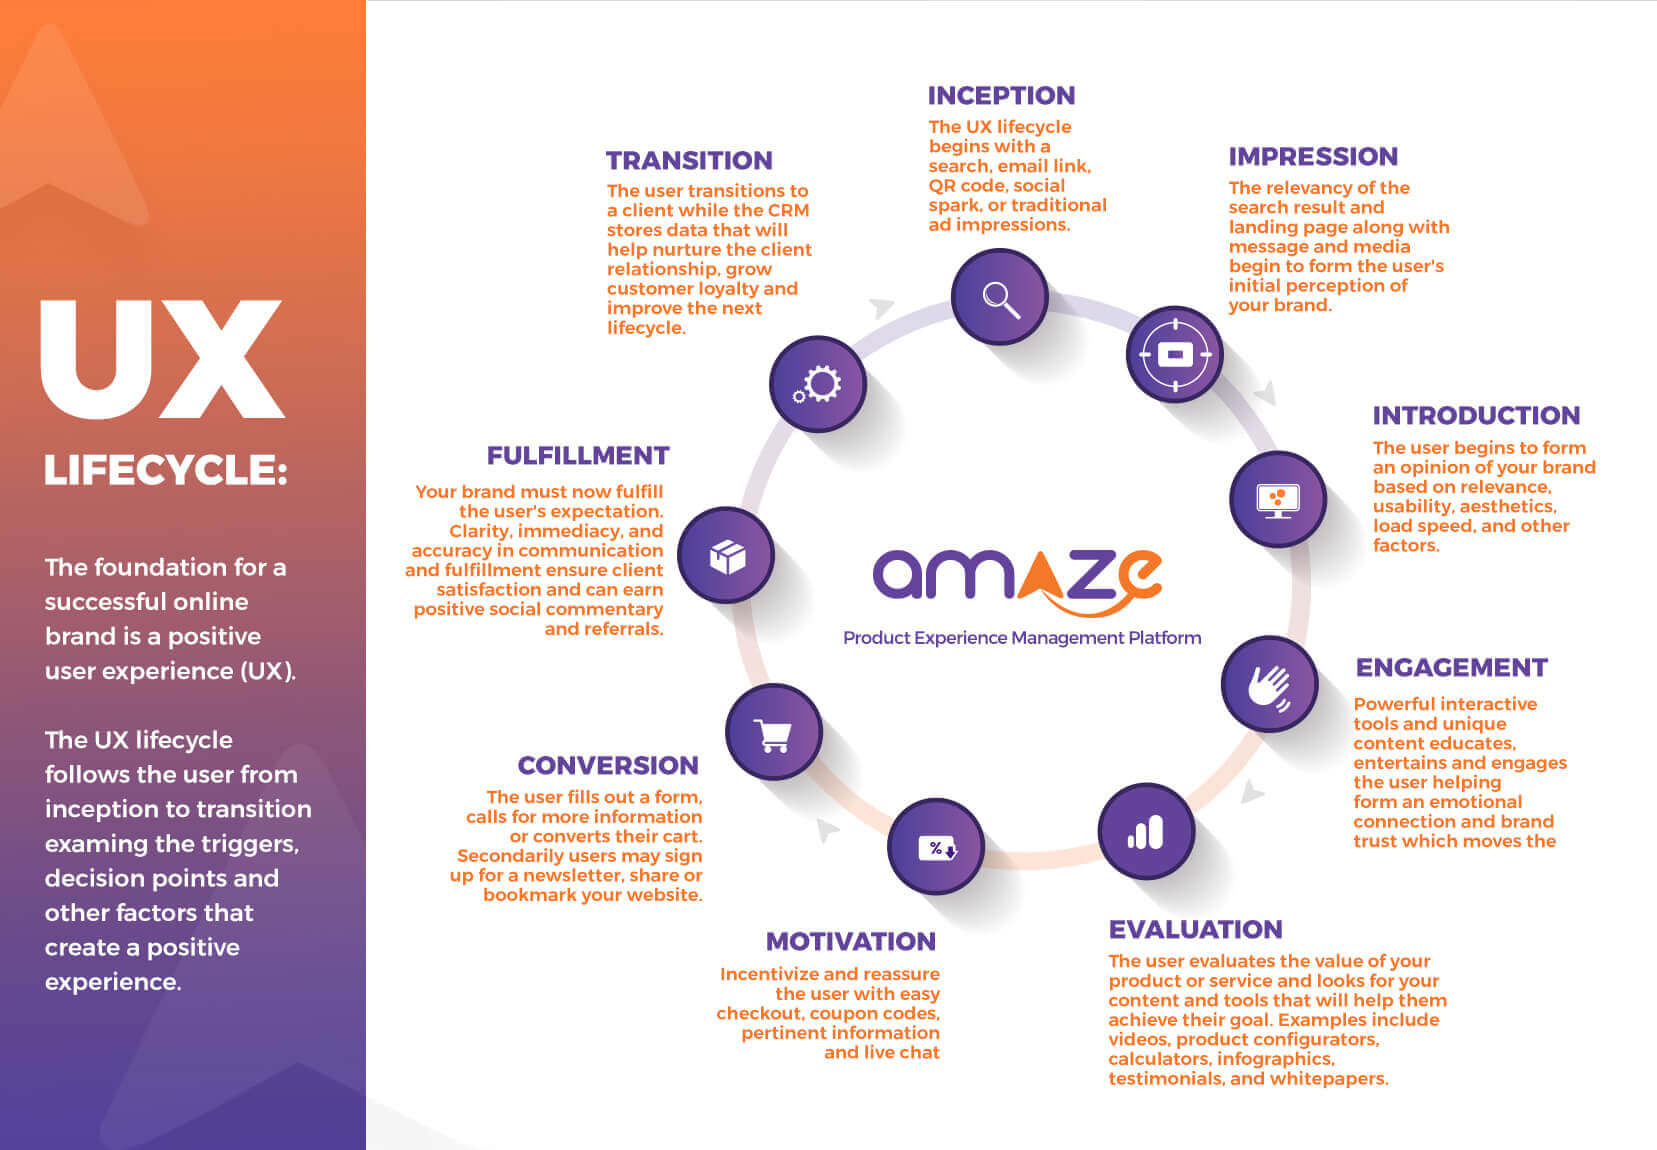 user experience lifecycle by amaze PXM software